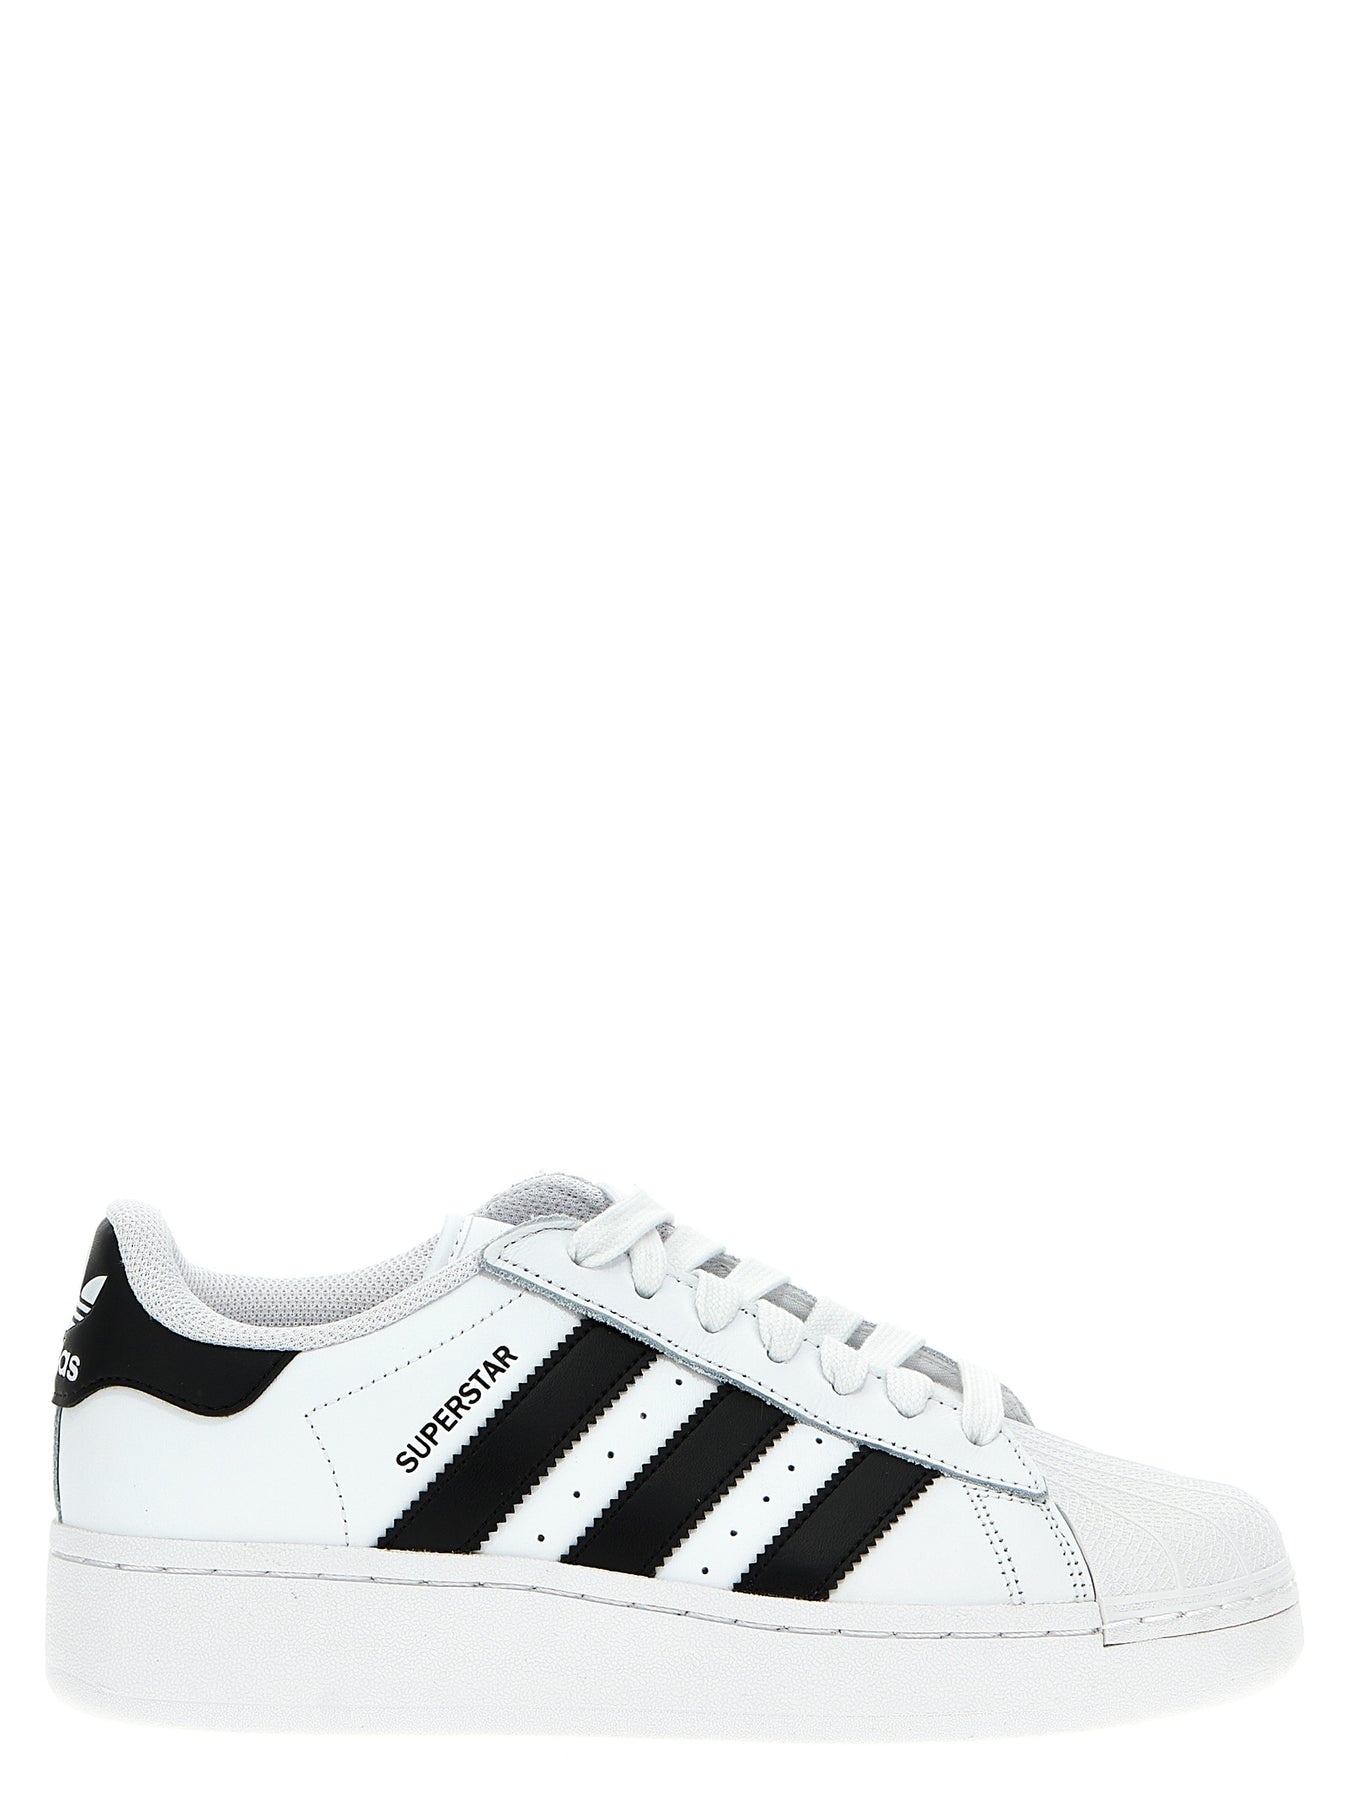 Superstar Xlg Sneakers White/Black - 1